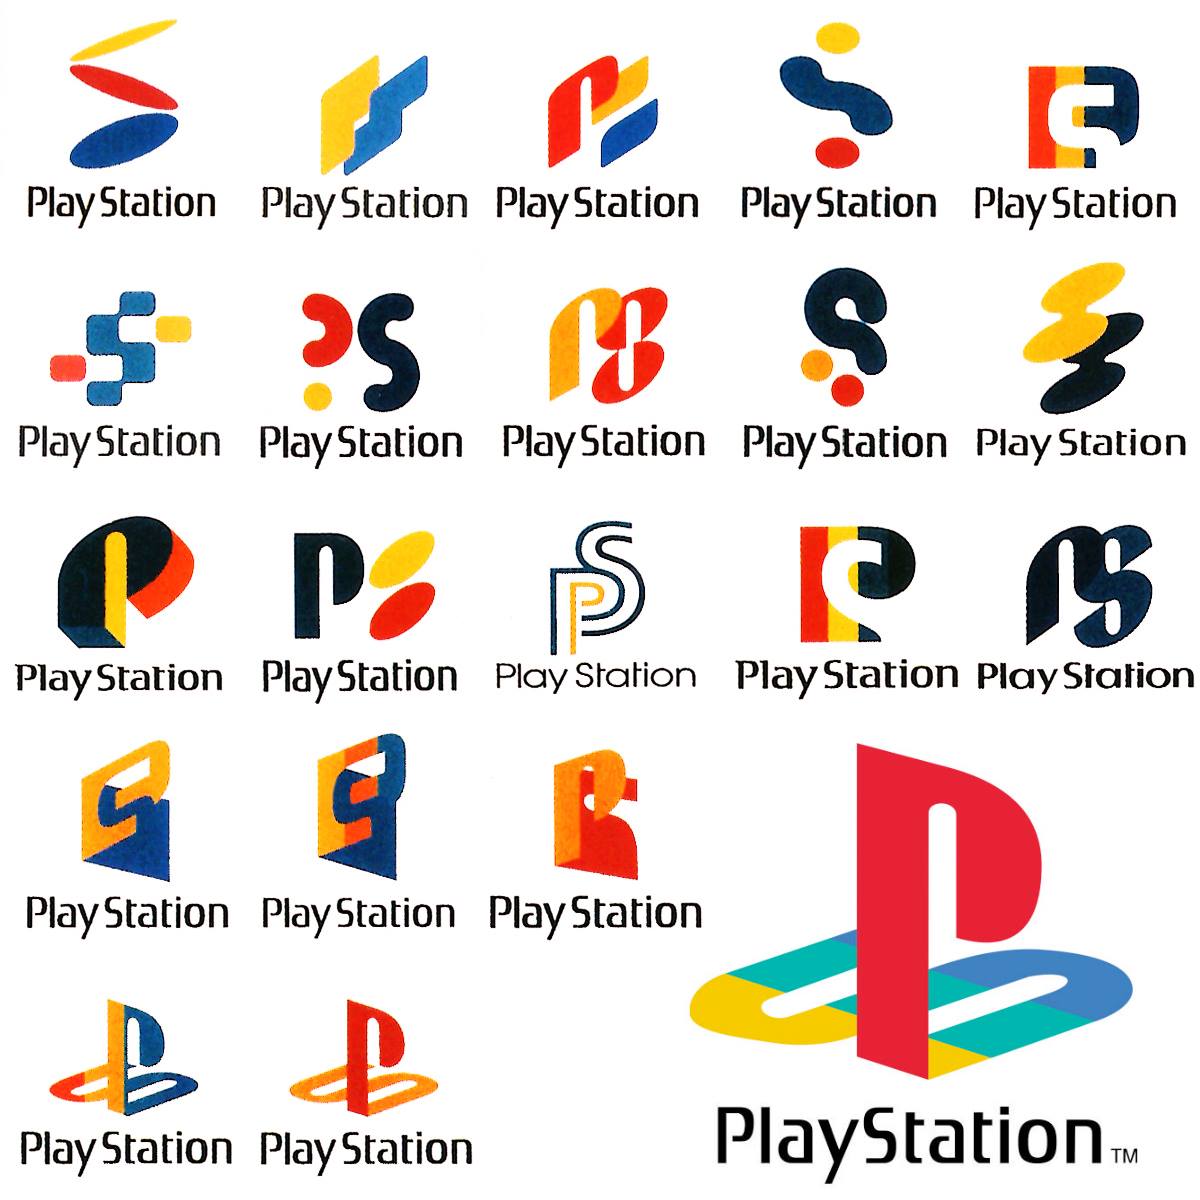 Old Sony Logo - Early Playstation Logo Concepts released by Sony | NeoGAF